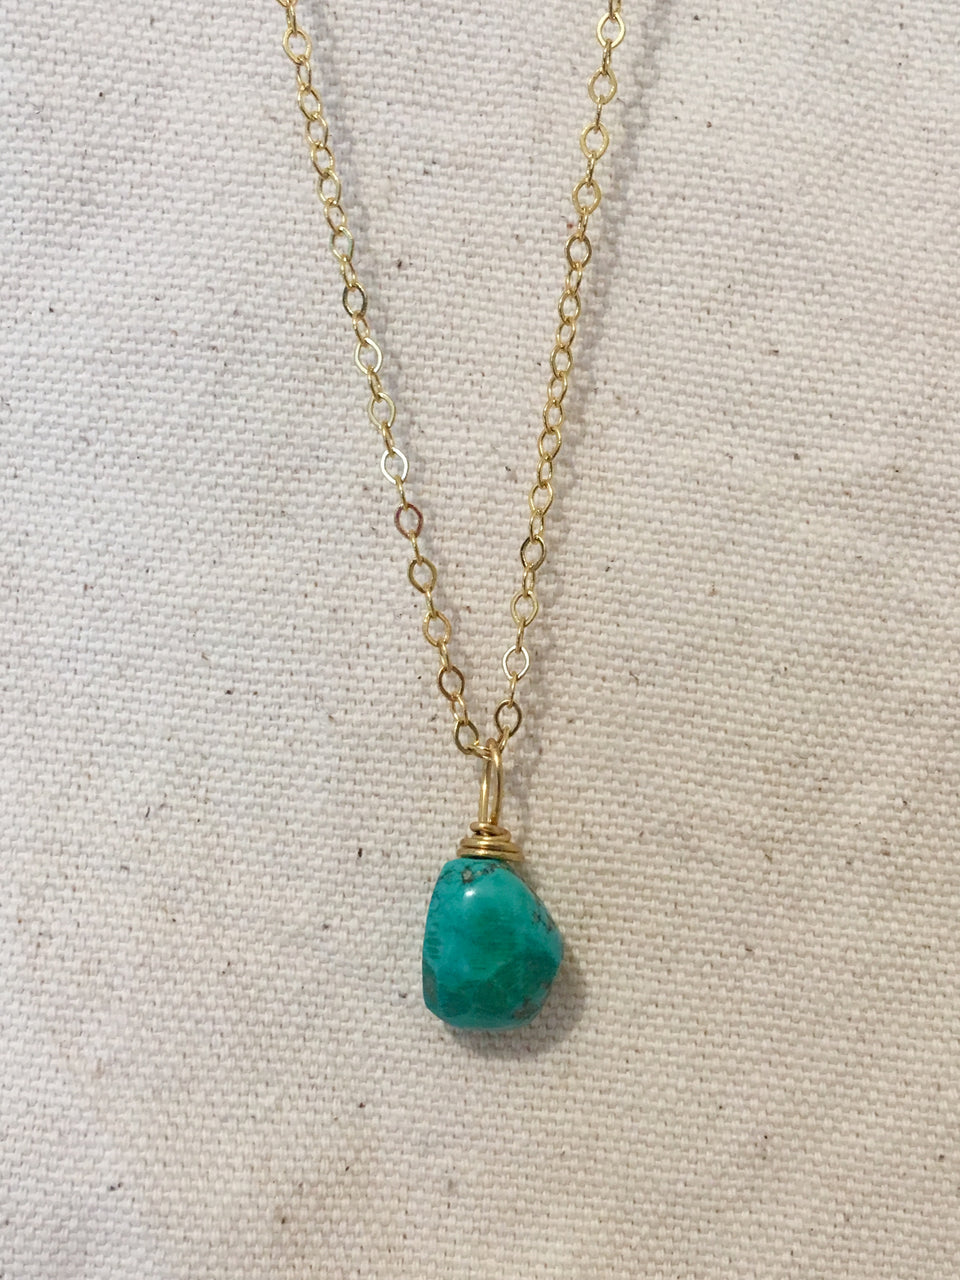 Turquoise charm necklace